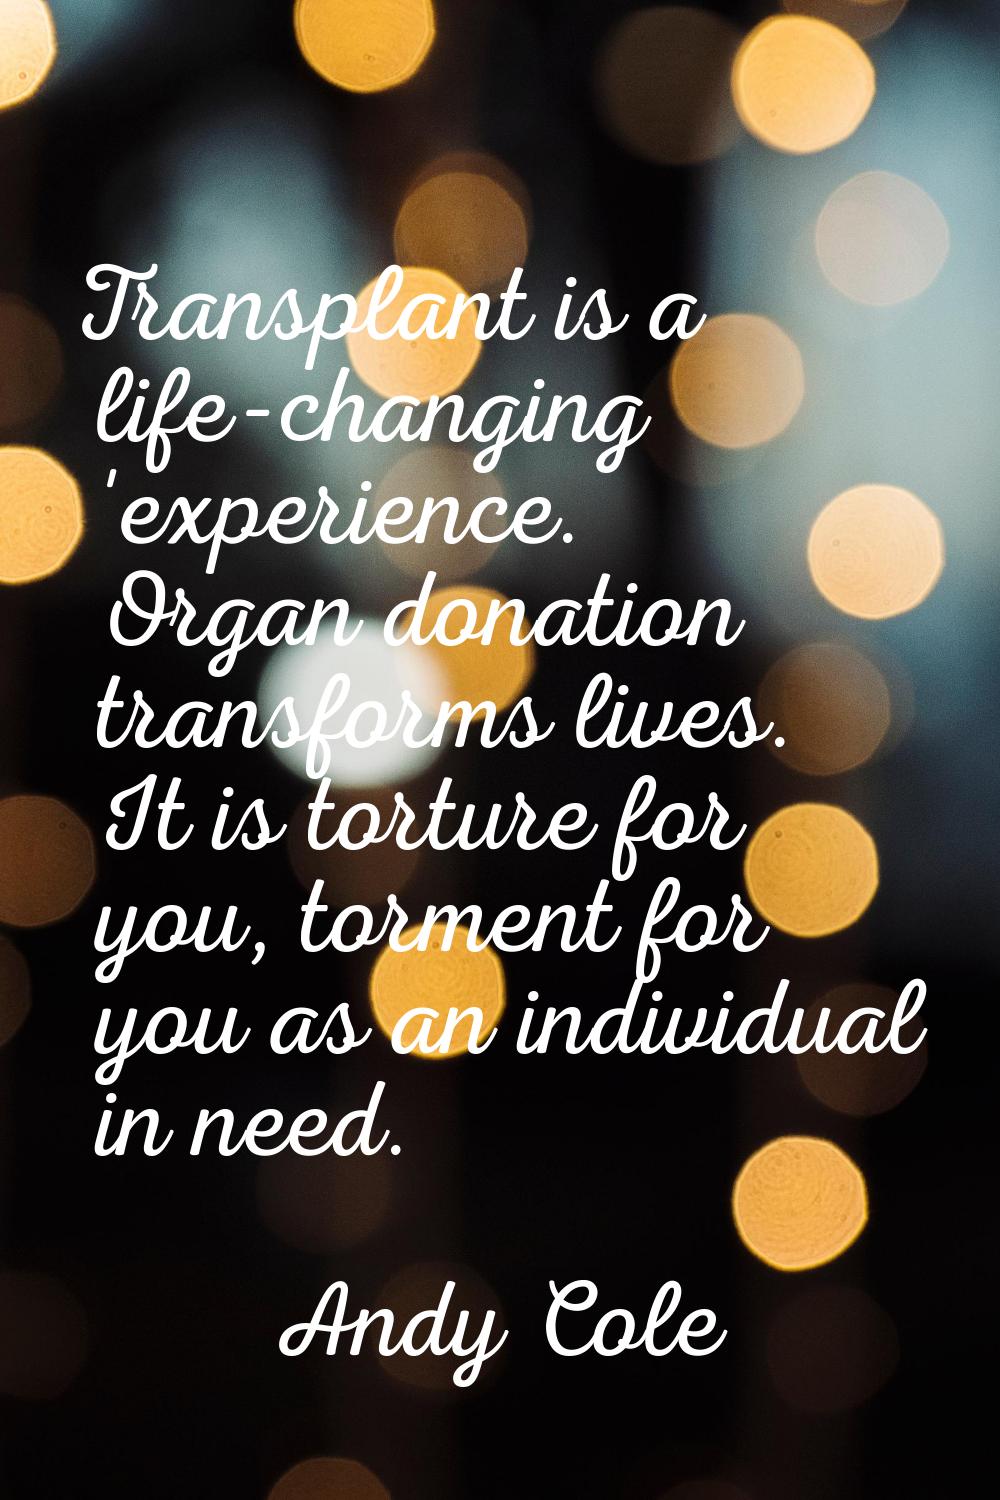 Transplant is a life-changing 'experience. Organ donation transforms lives. It is torture for you, 